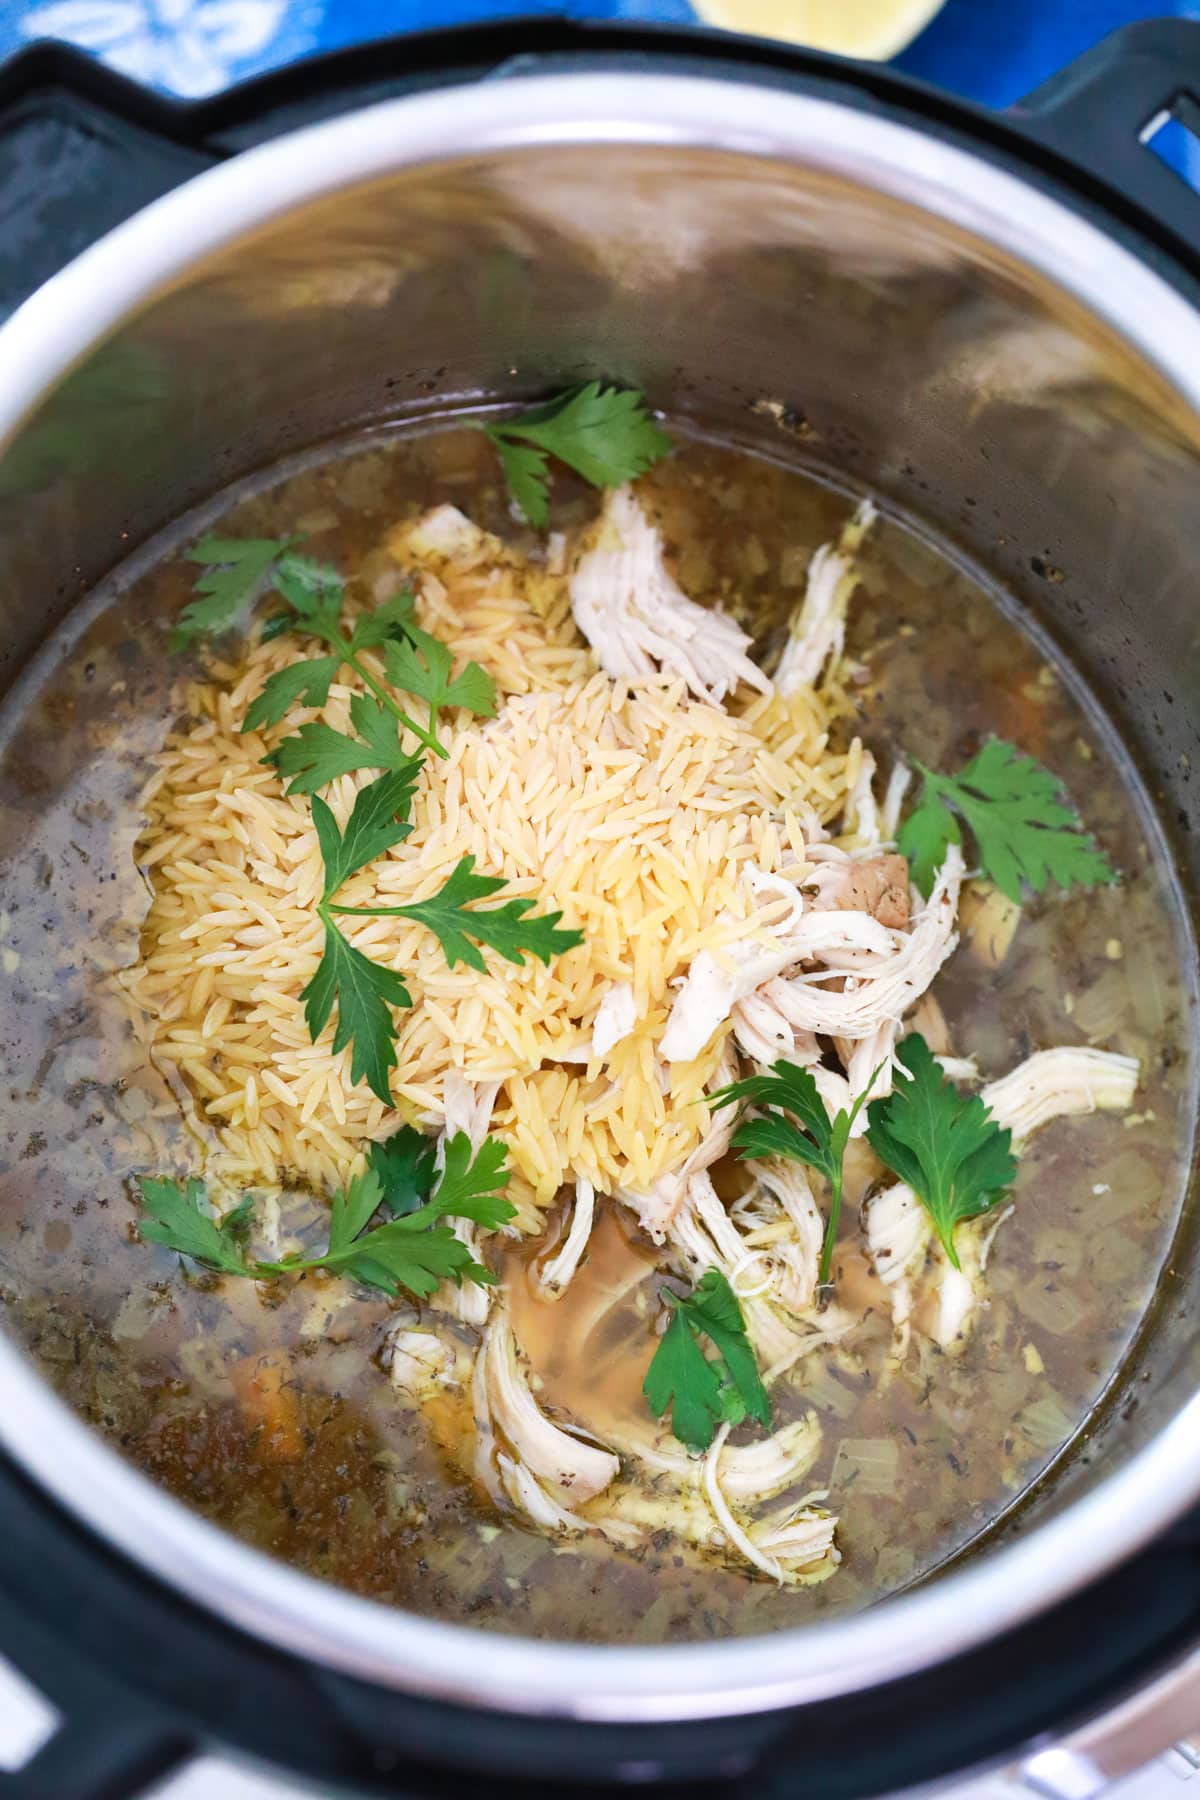 shredded chicken and orzo added to make lemon chicken orzo soup in the pressure cooker